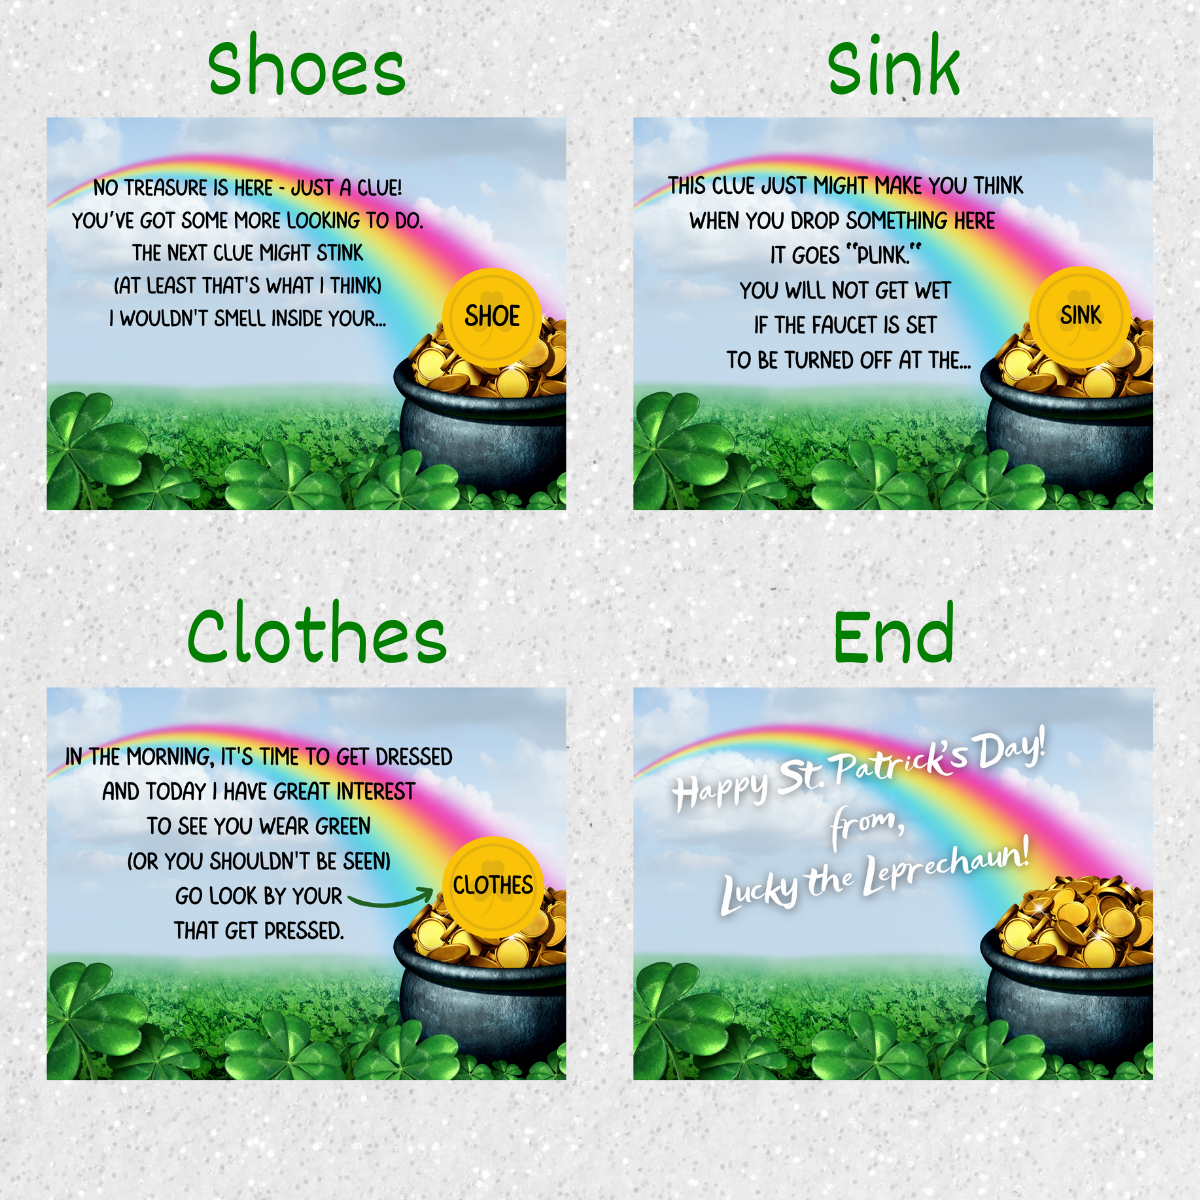 Four example cards are shown, with the locations of each labeled as: Shoes, Sink, Clothes, End.